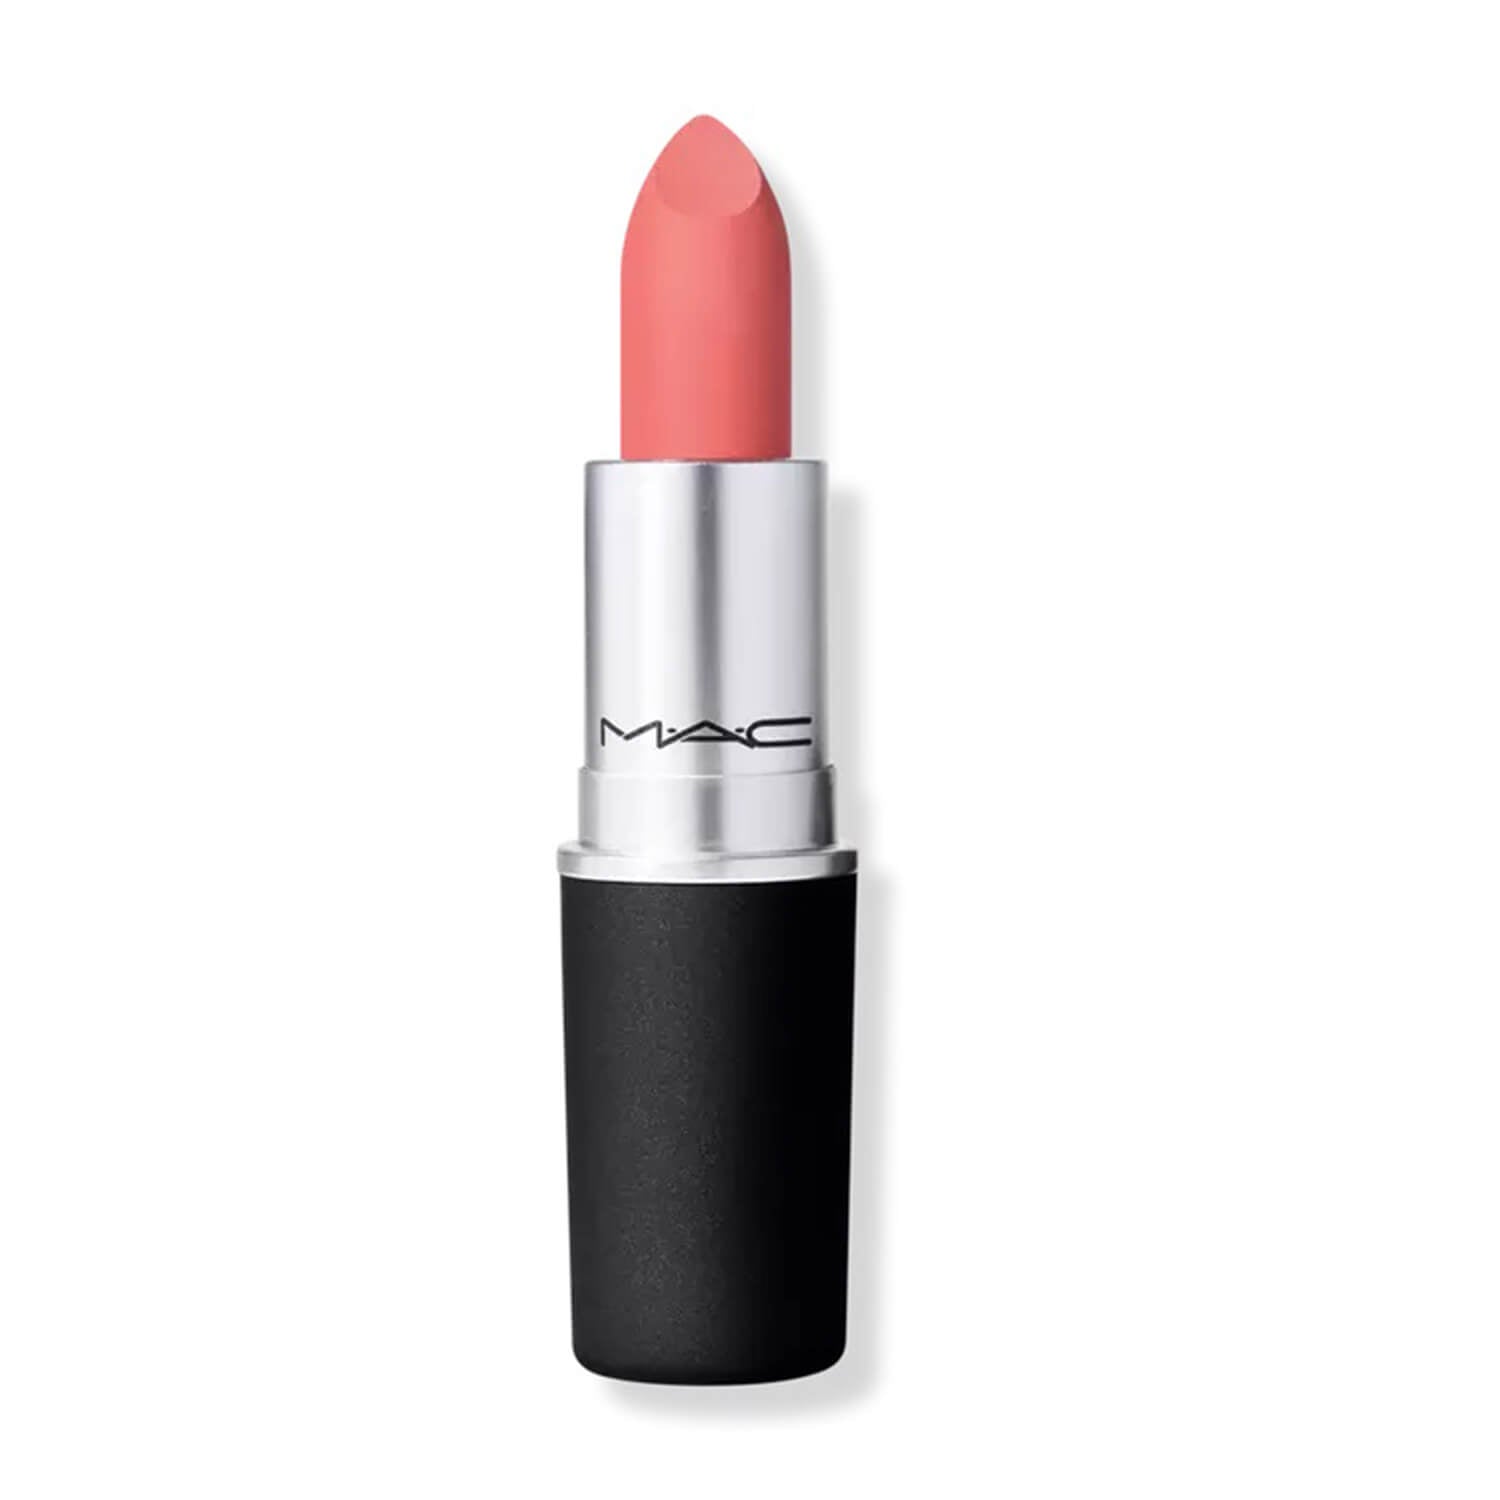 Shop mac mull it over lipstick available at Heygirl.pk for delivery in Pakistan